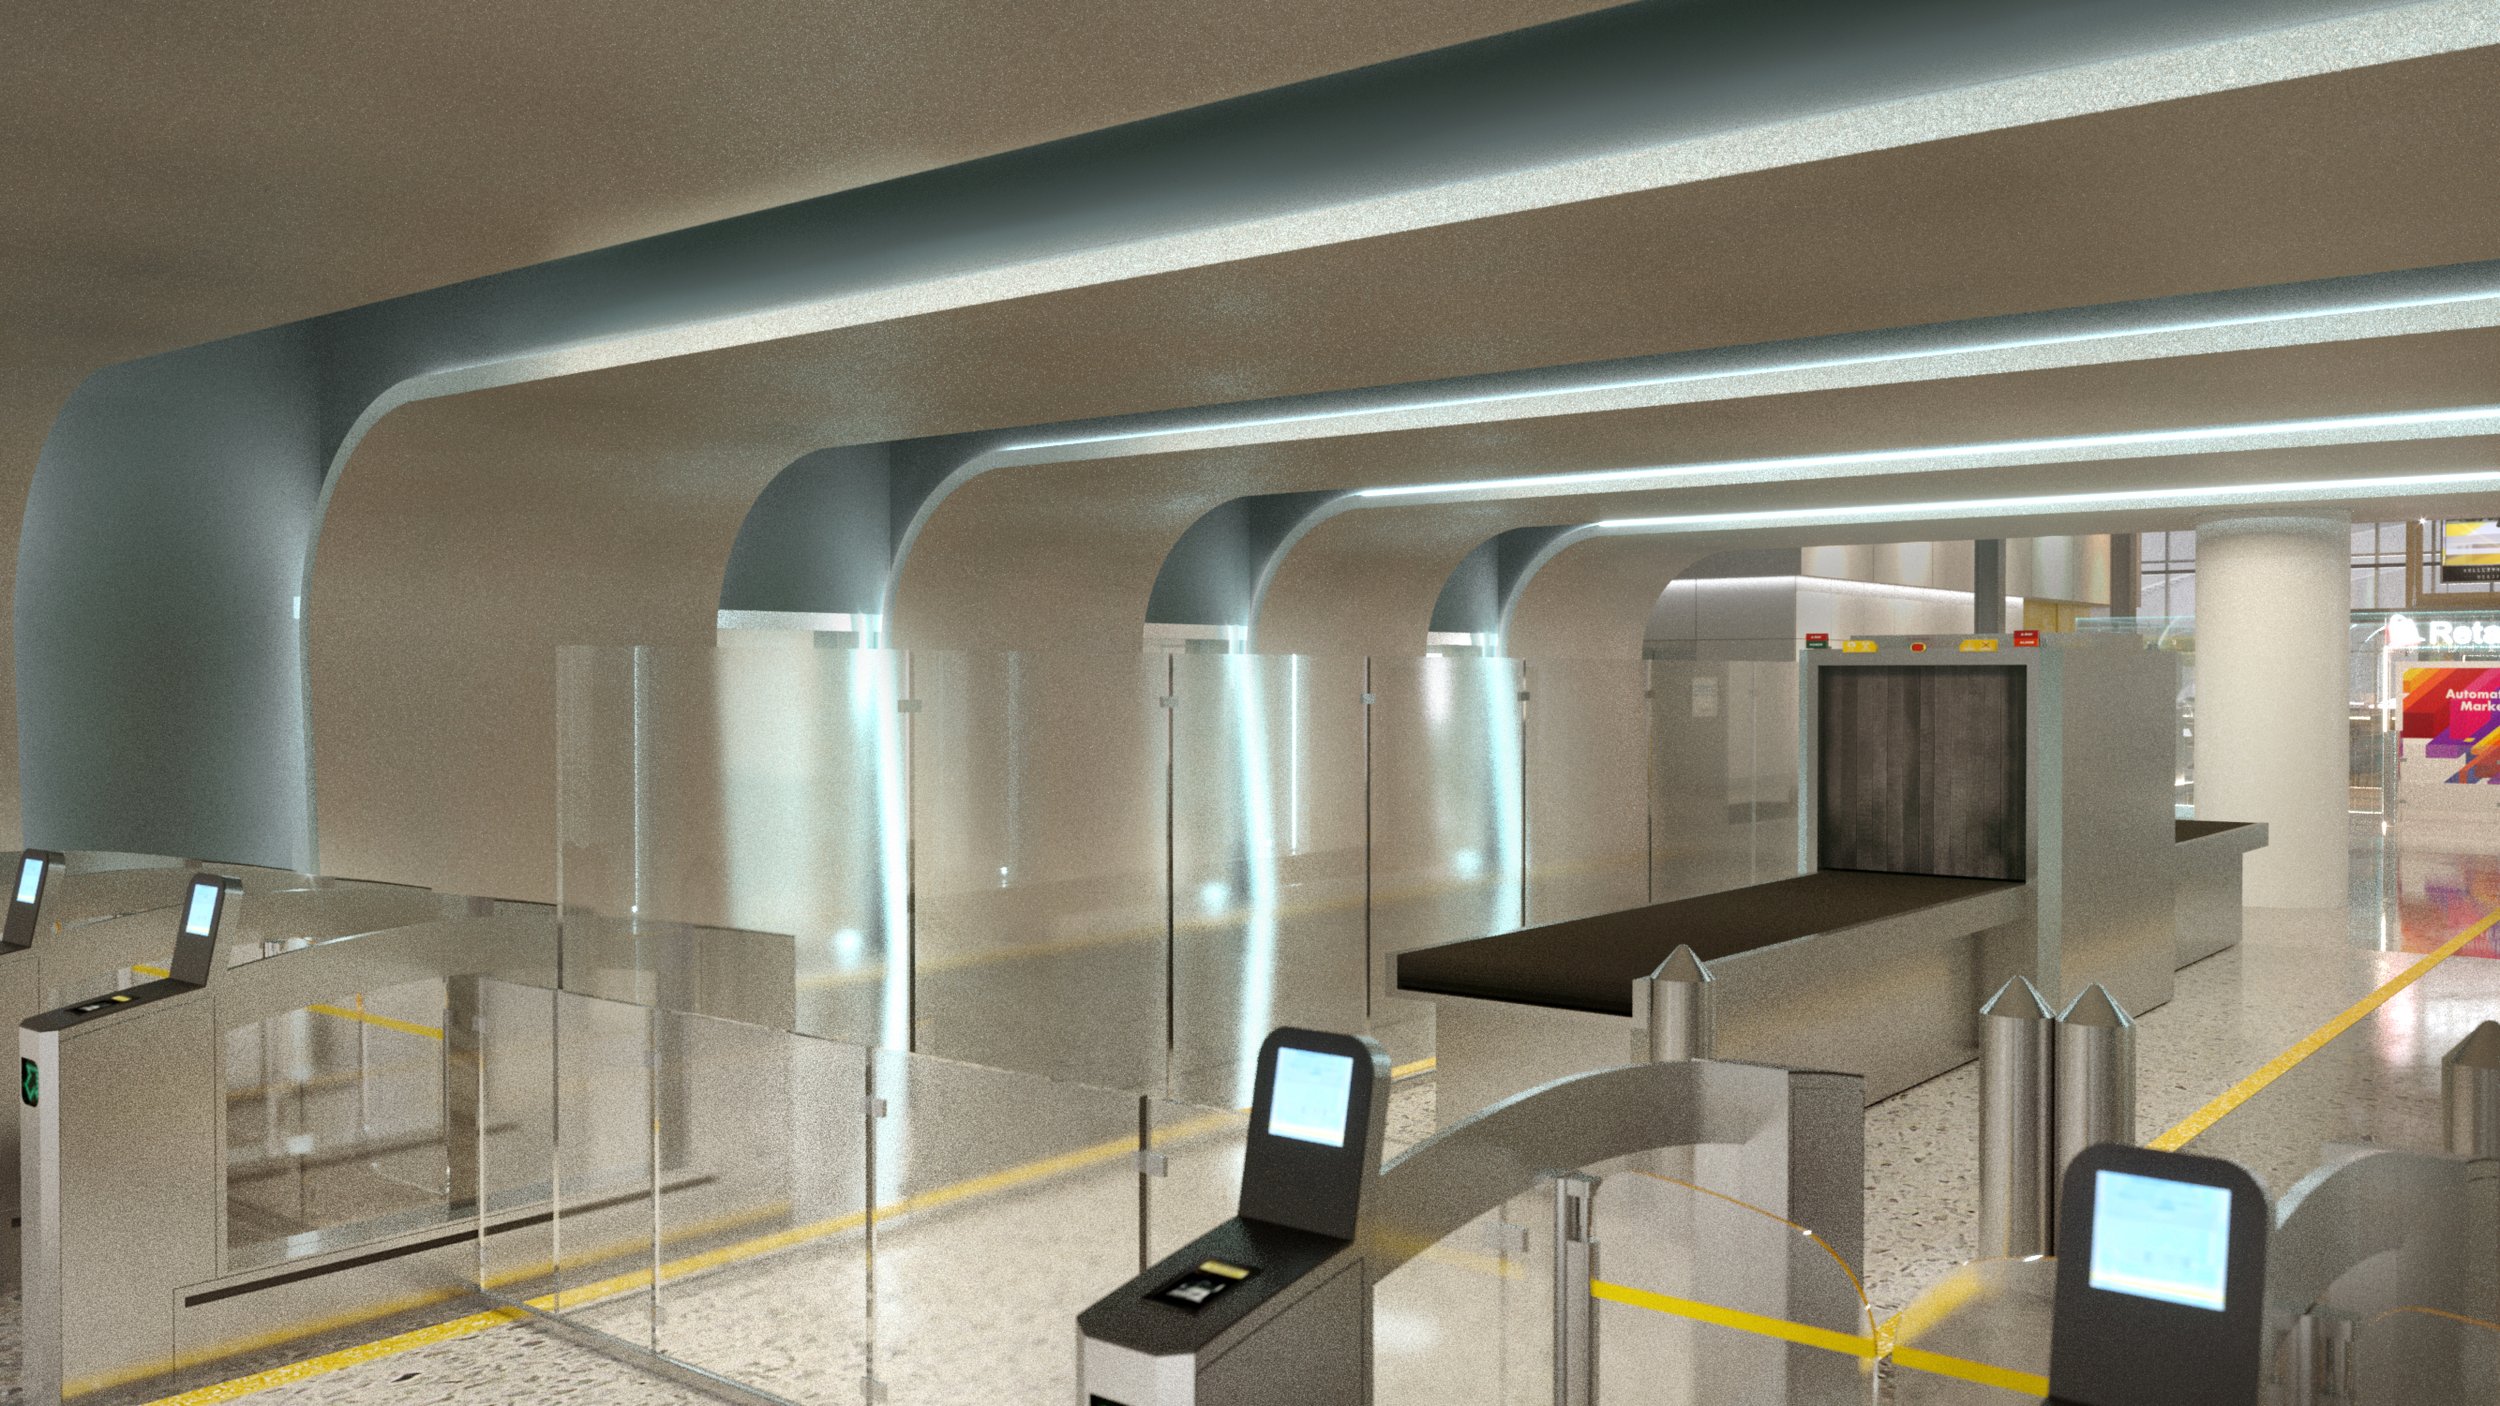 Brightline Reveals New Renderings Giving First Look Inside Its Future Orlando Station 3.jpg